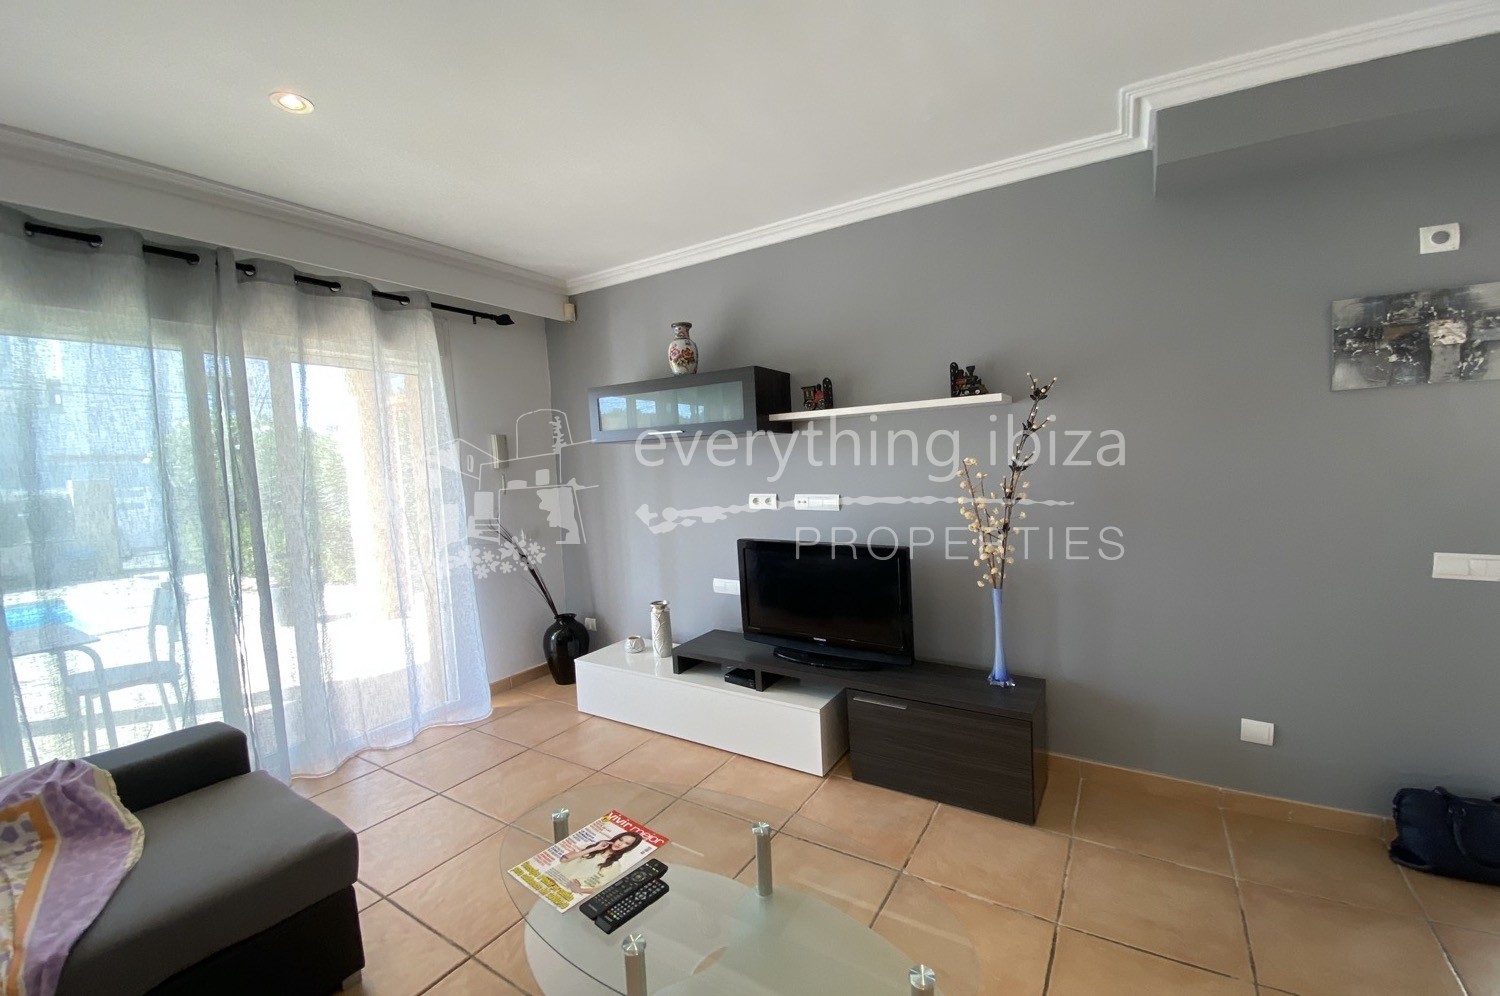 Lovely detached villa for sale by everything ibiza Properties